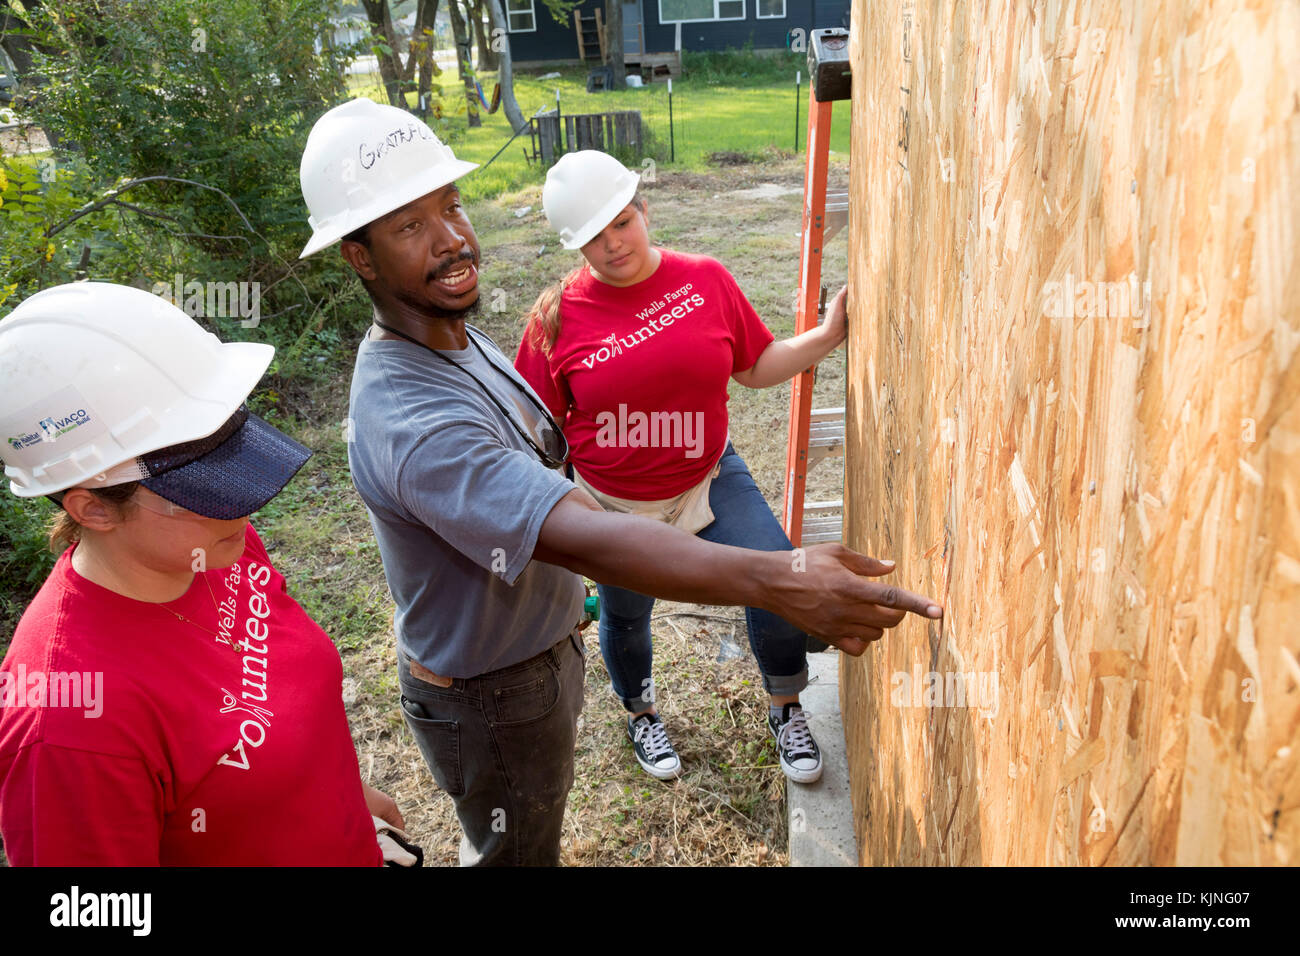 Houston, Texas - Two volunteers from Wells Fargo Bank get instruction as they help build a Habitat for Humanity house for a low-income family. The nee Stock Photo